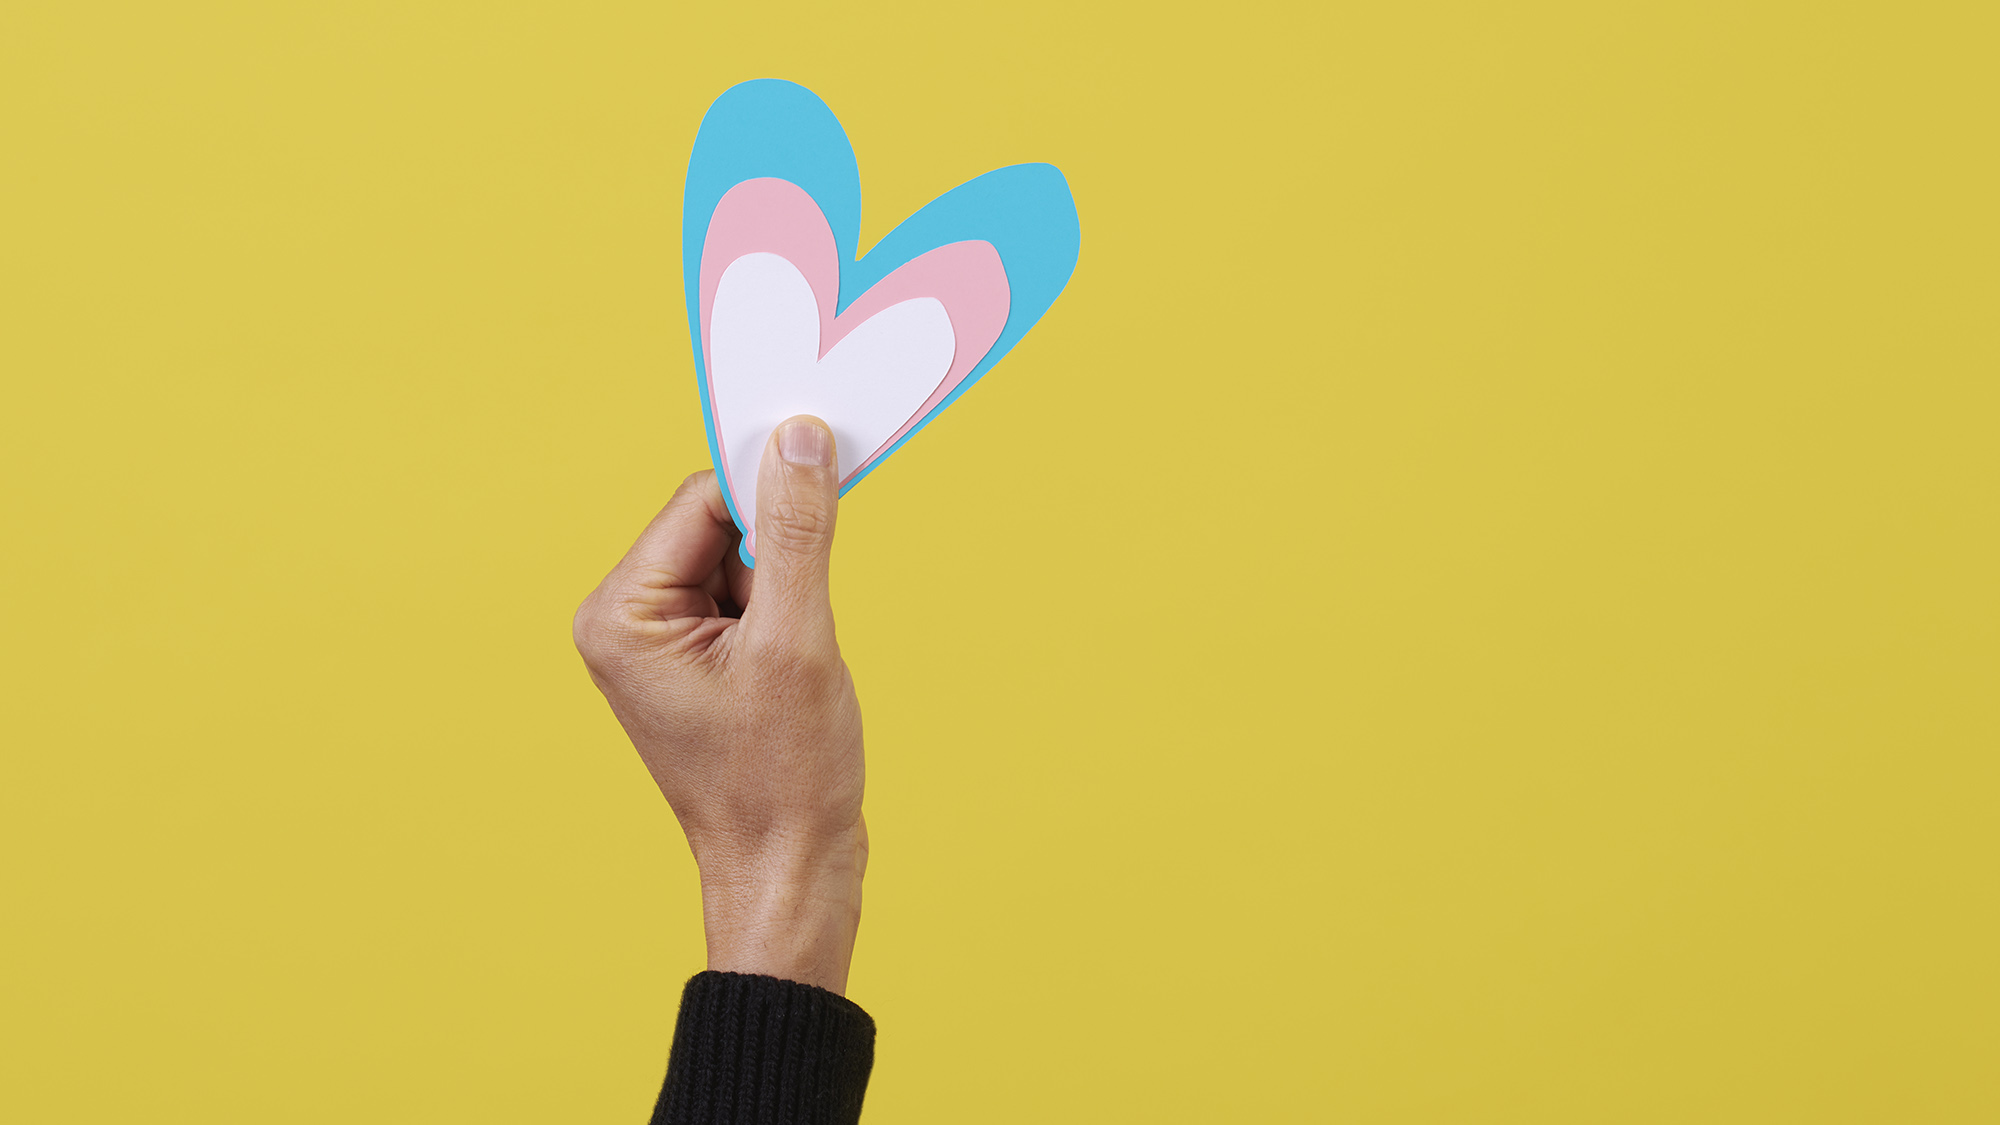 A hand holds up a blue, white, and pink heart in front of a bright yellow background